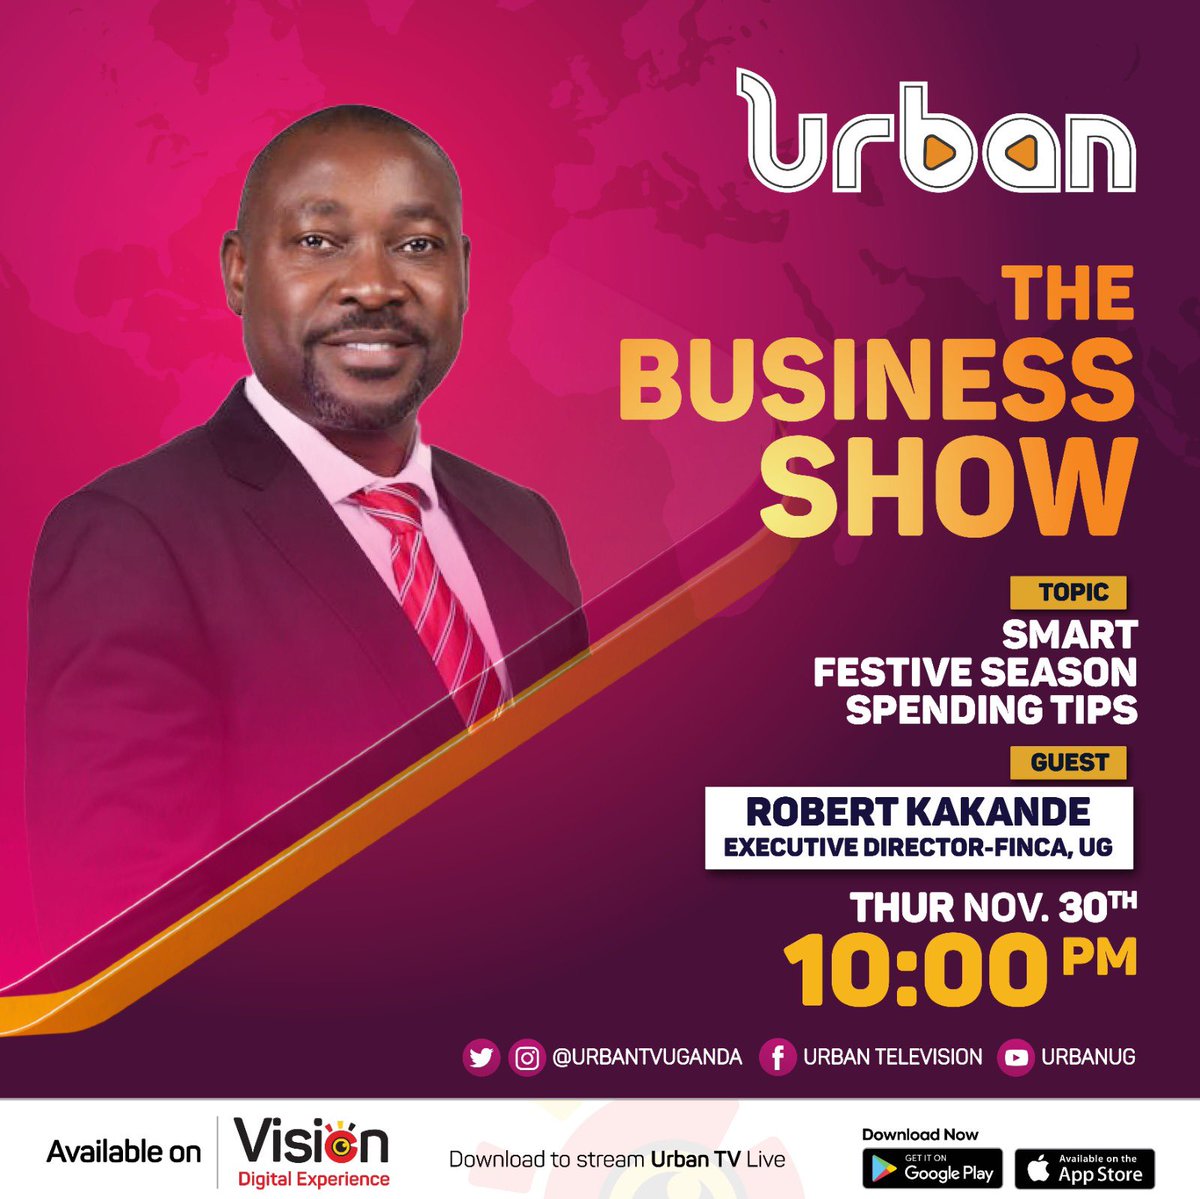 Catch us live today on @UrbanTVUganda on the business show as our Executive Director @Rakakande discusses about smart festive season spending tips. 

📌Tune in at exactly 10:00 pm 
#TomorrowIsHere